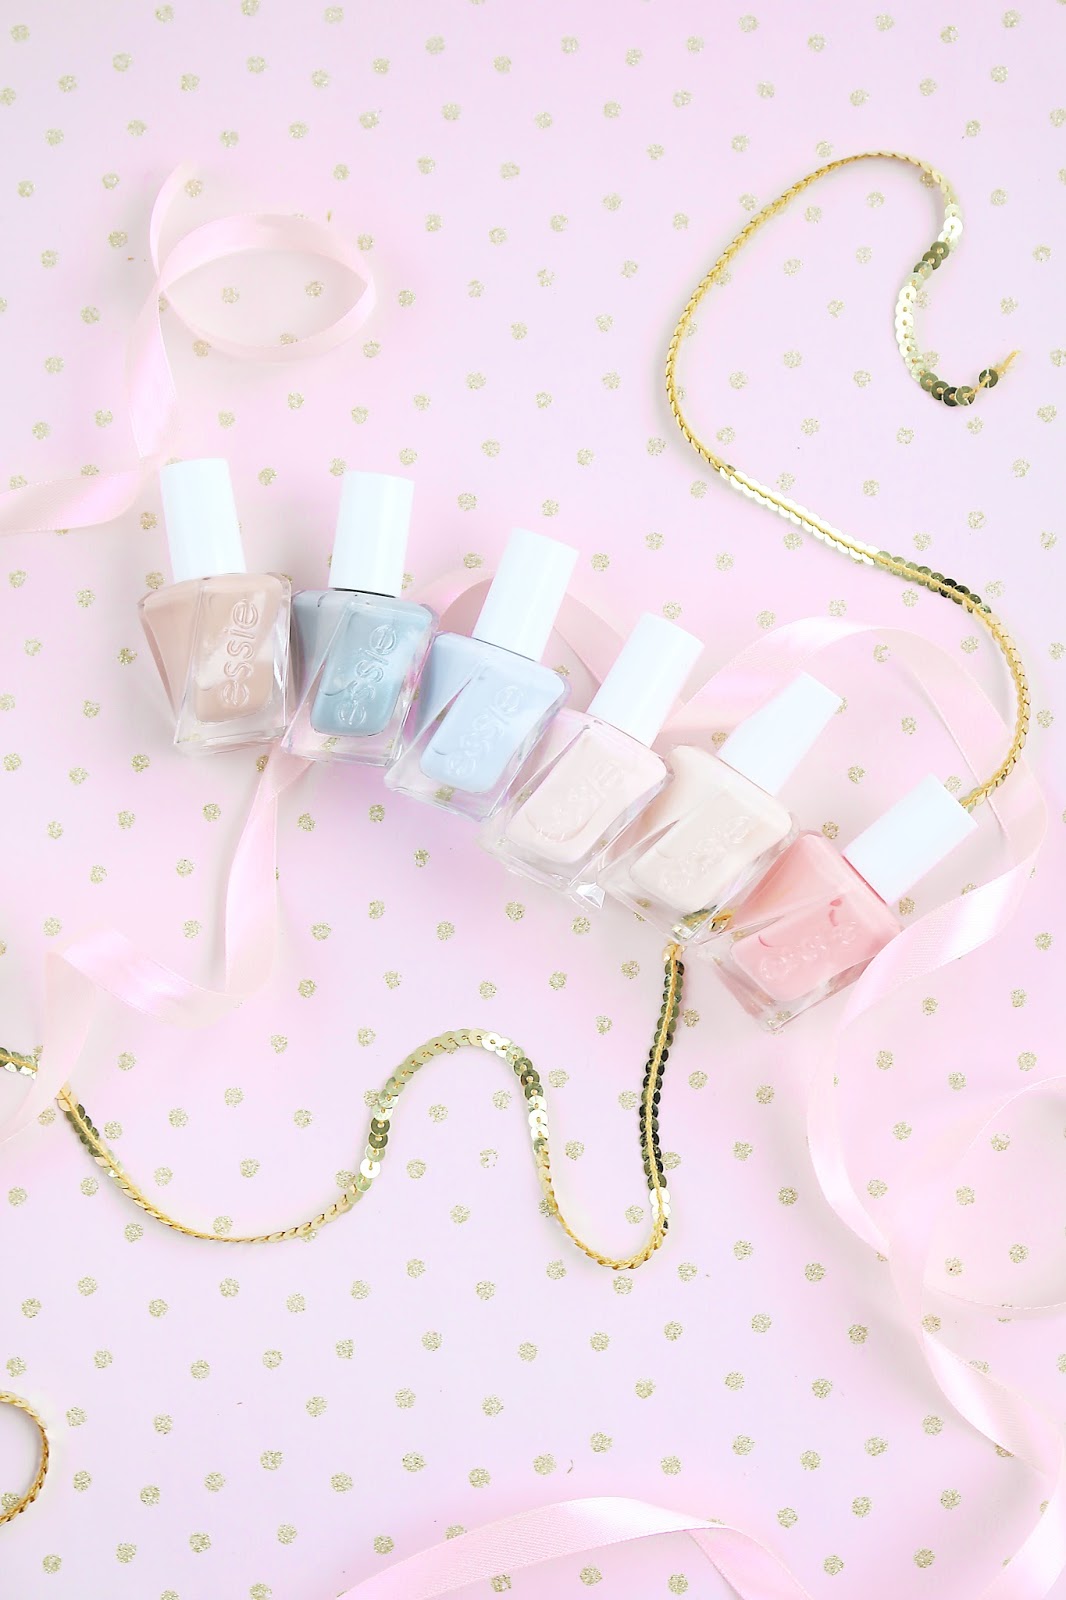 The New Dreamy Collection From Essie Which You Need